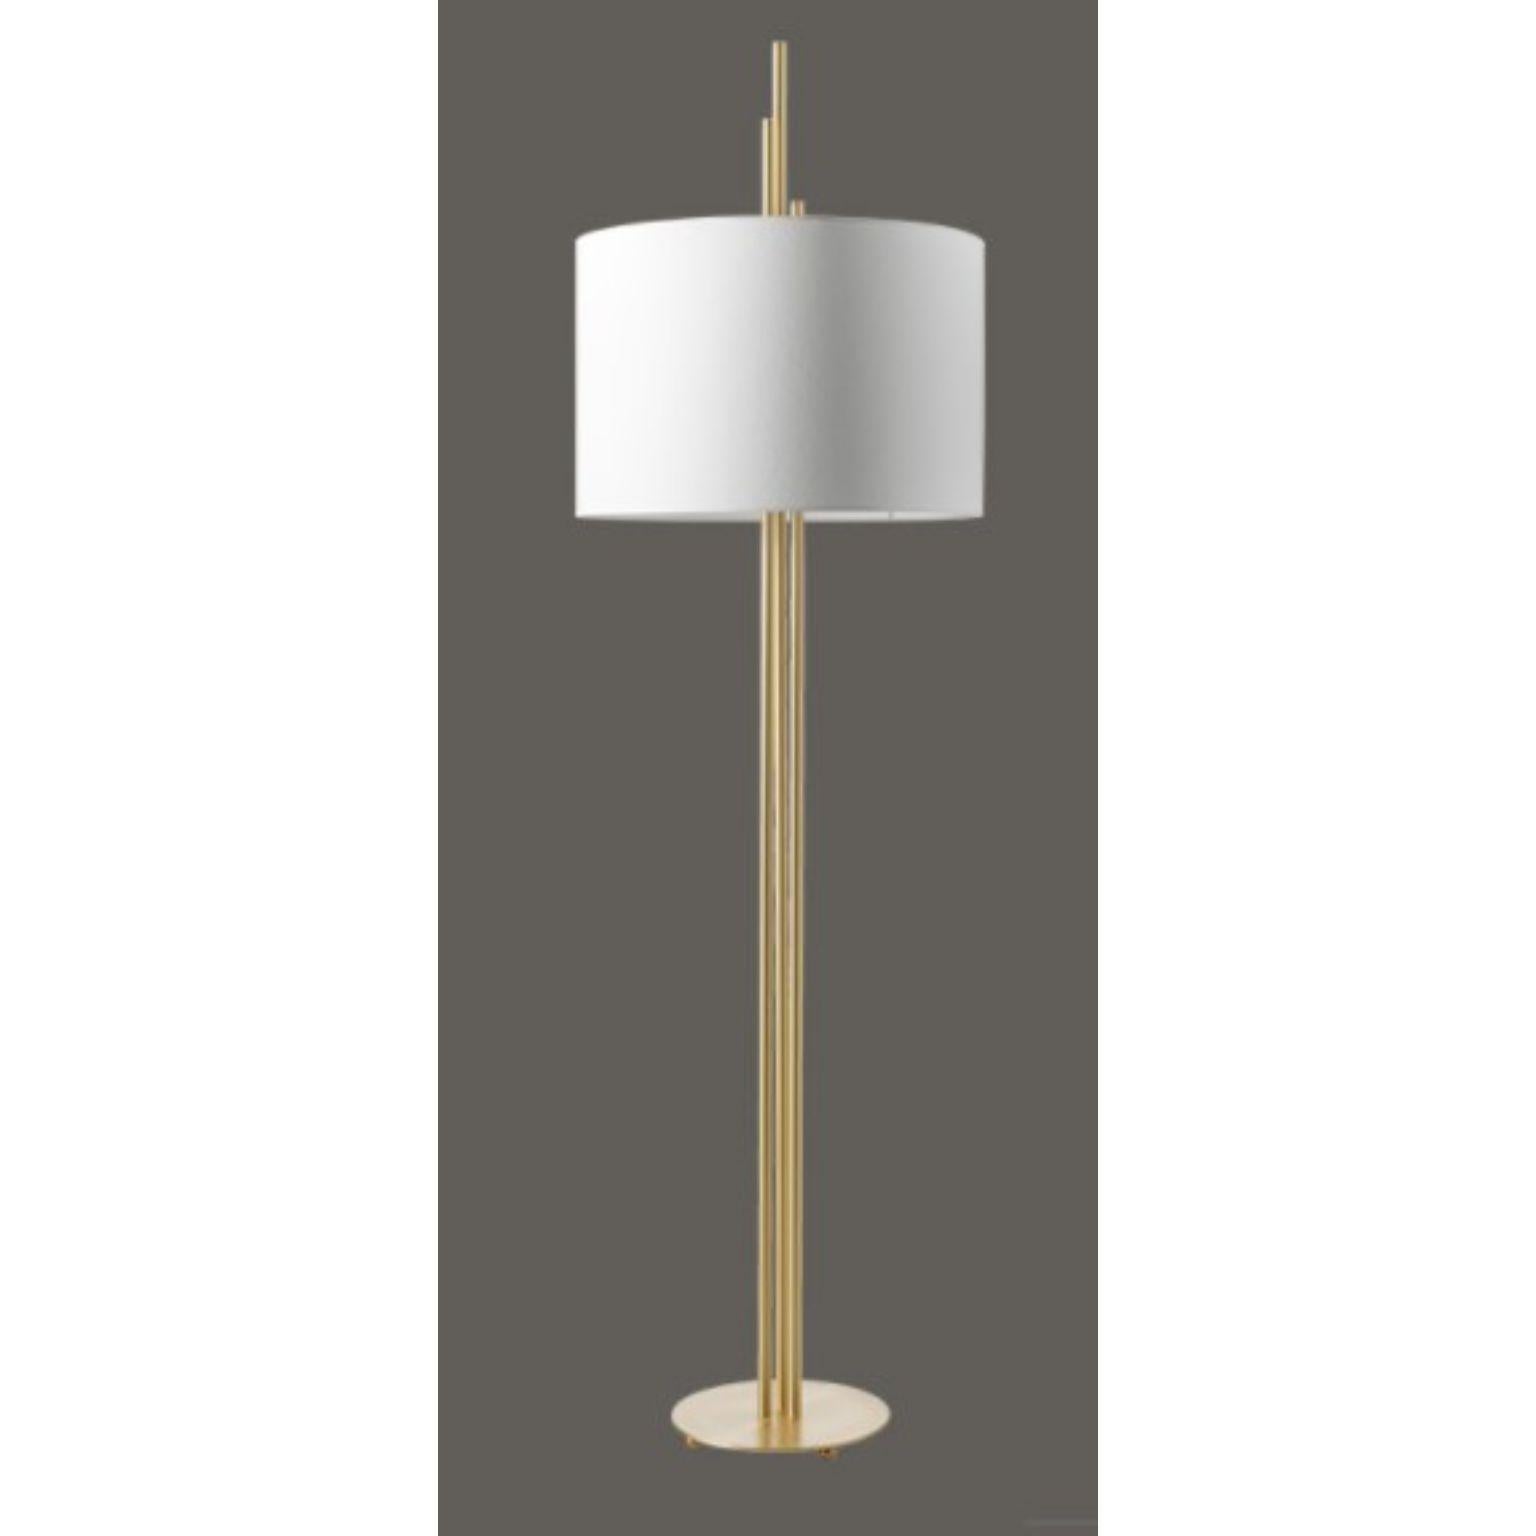 Upper floor lamp by Hervé Langlais
Dimensions: D60X H200 cm
Materials: Solid brass,Lampshade Drop Paper® M1, Black textile cable (2m).
Others finishes are available.

All our lamps can be wired according to each country. If sold to the USA it